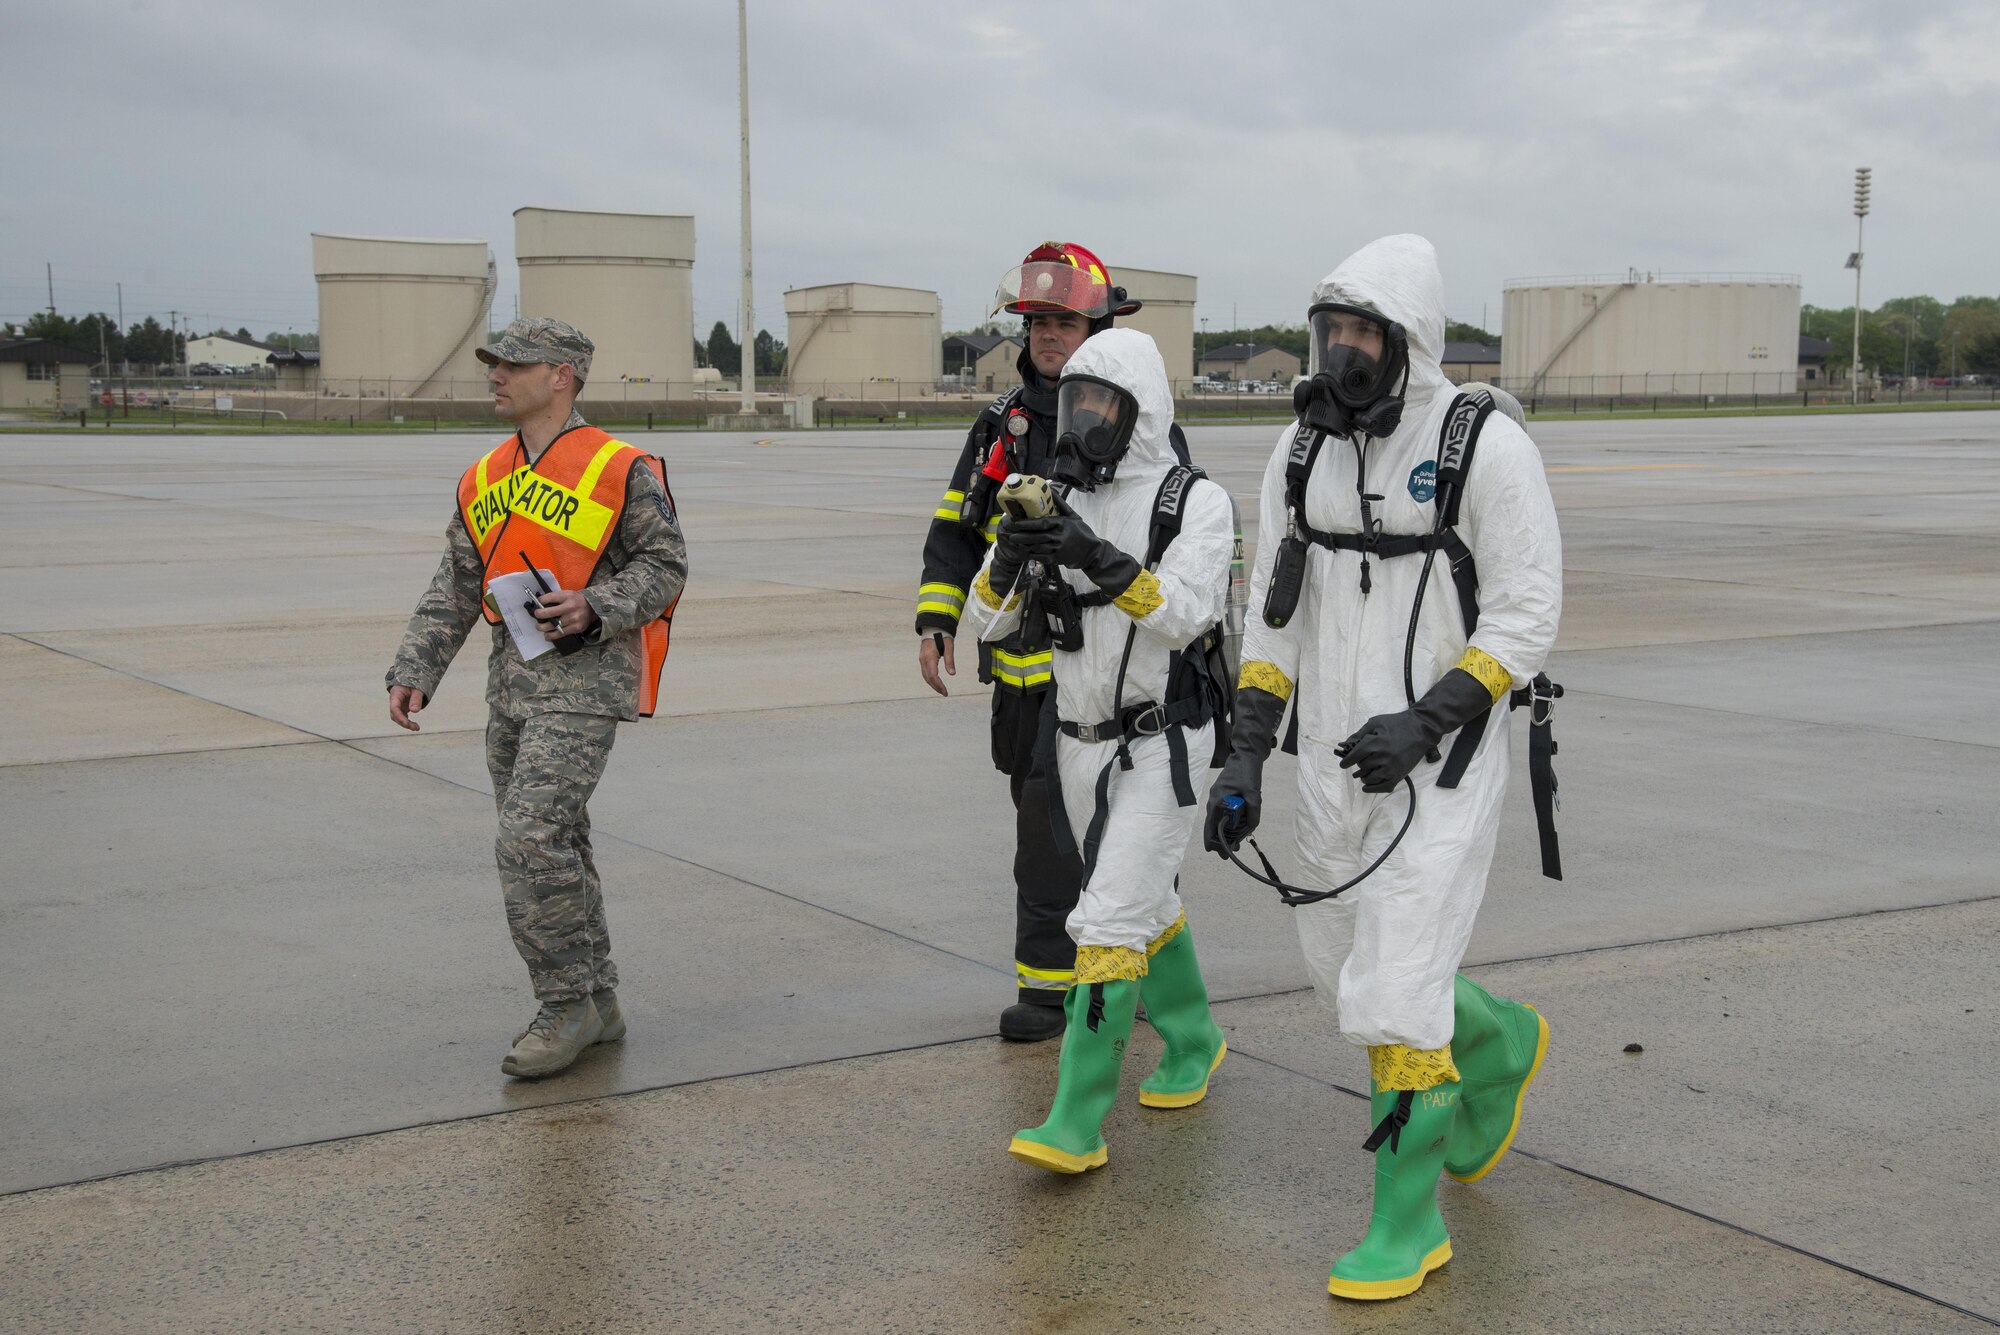 Emergency responders assigned to the 436th Airlift Wing investigate a simulated large-volume fuel spill during an exercise April 20, 2017, at Dover Air Force Base, Del. The exercise simulated damage to a fuel silo, pictured in the background. These siloes are capable of holding millions of gallons of Jet-A fuel. (U.S. Air Force photo by Senior Airman Aaron J. Jenne)